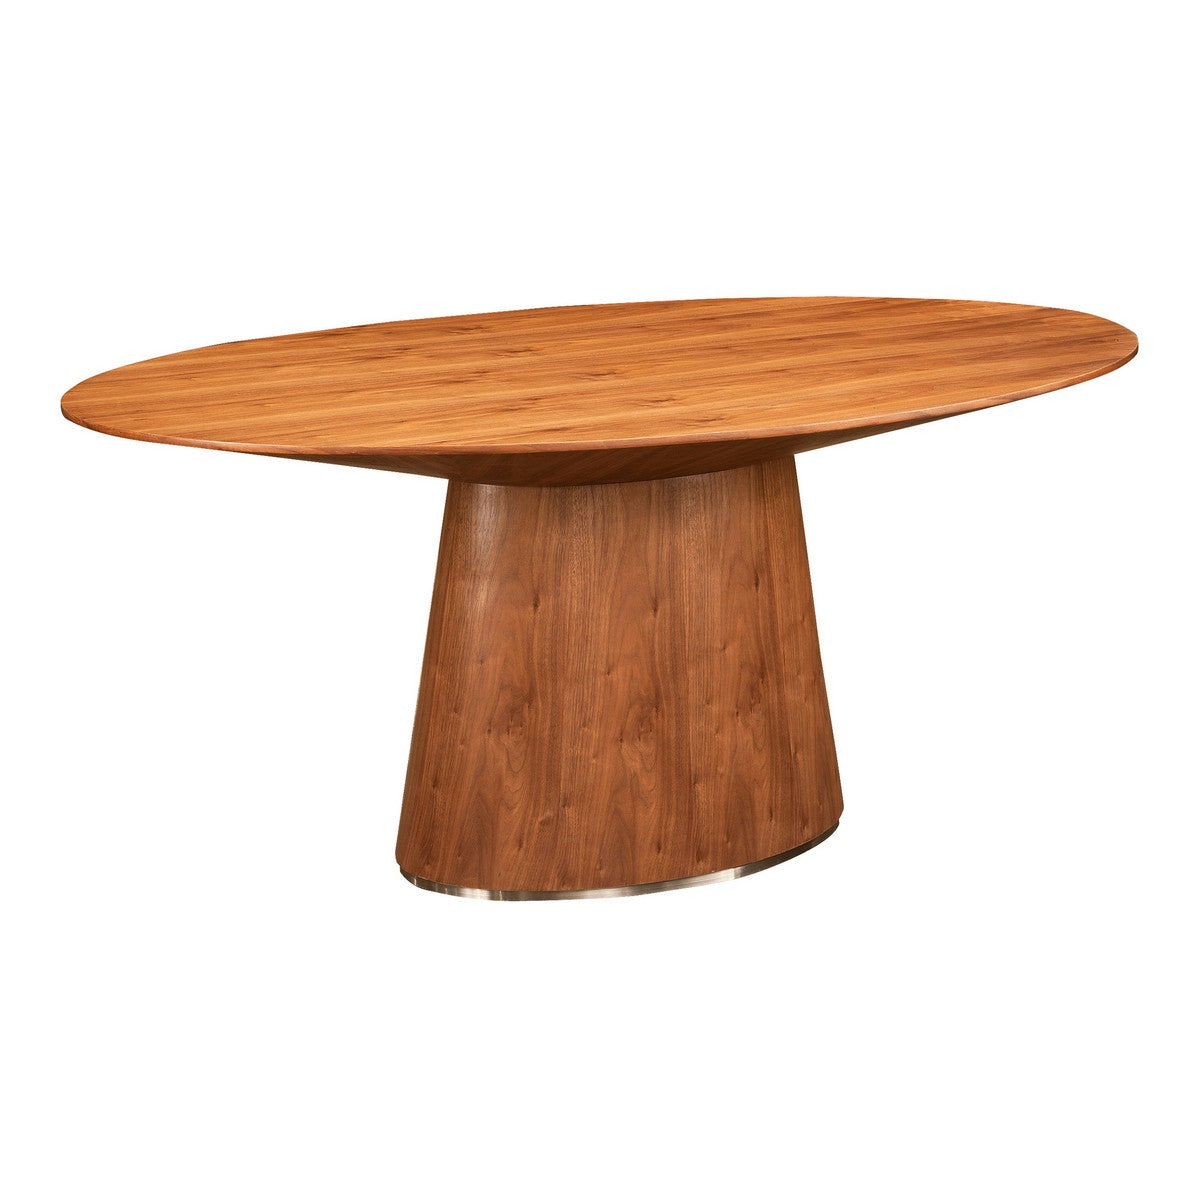 Moe's Home Collection Otago Oval Dining Table Walnut - KC-1007-03 - Moe's Home Collection - Dining Tables - Minimal And Modern - 1